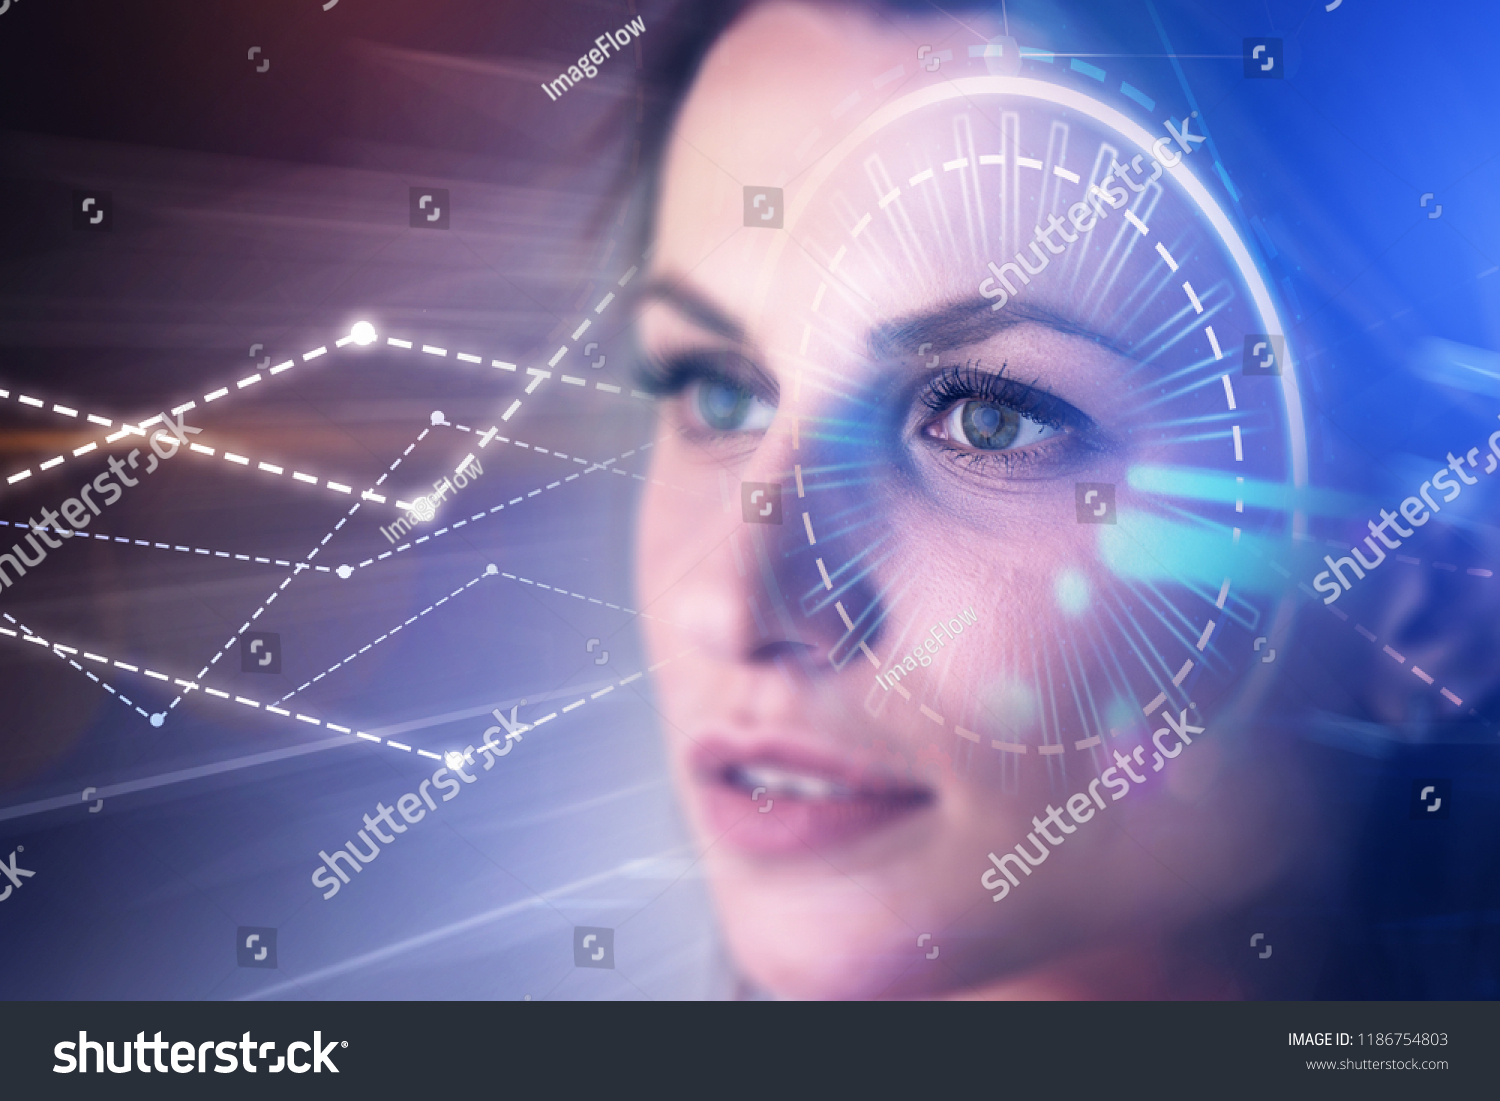 Portrait of young woman with dark hair looking forward. Gui and hud immersive interfaces and graphs over blurred background. Fintech concept. Toned image double exposure copy space #1186754803